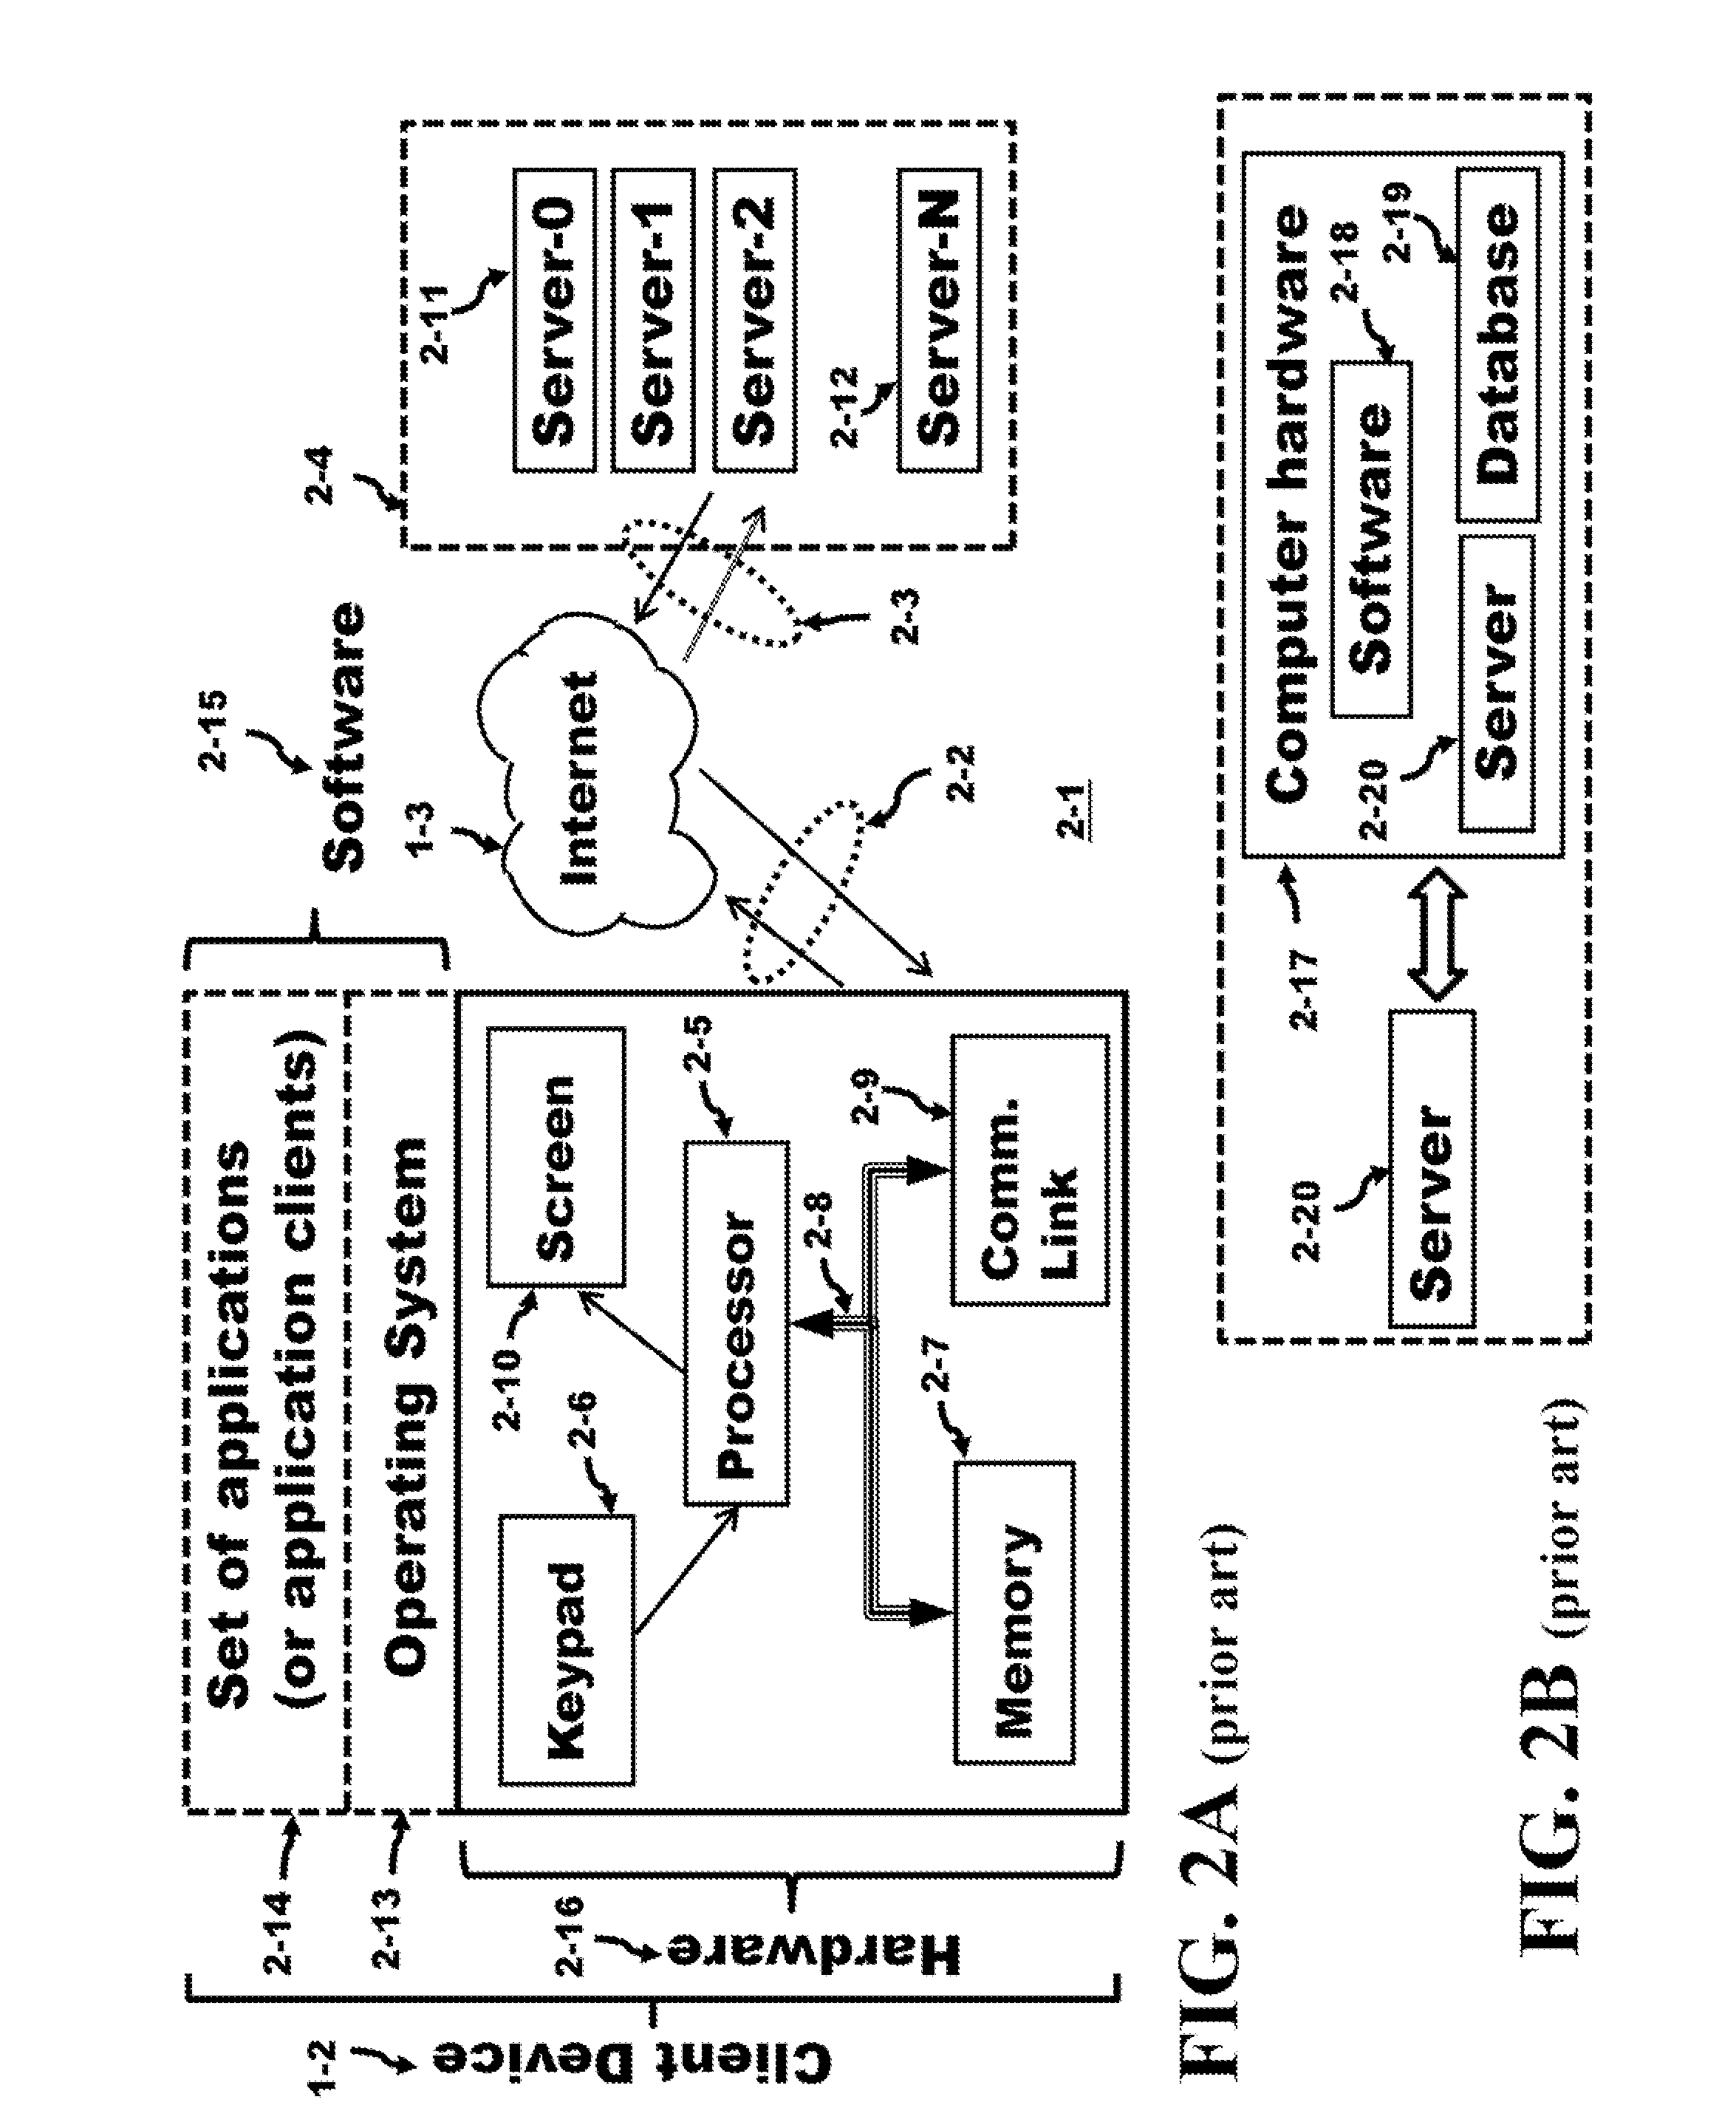 Method for Single Workflow for Multi-Platform Mobile Application Creation and Delivery